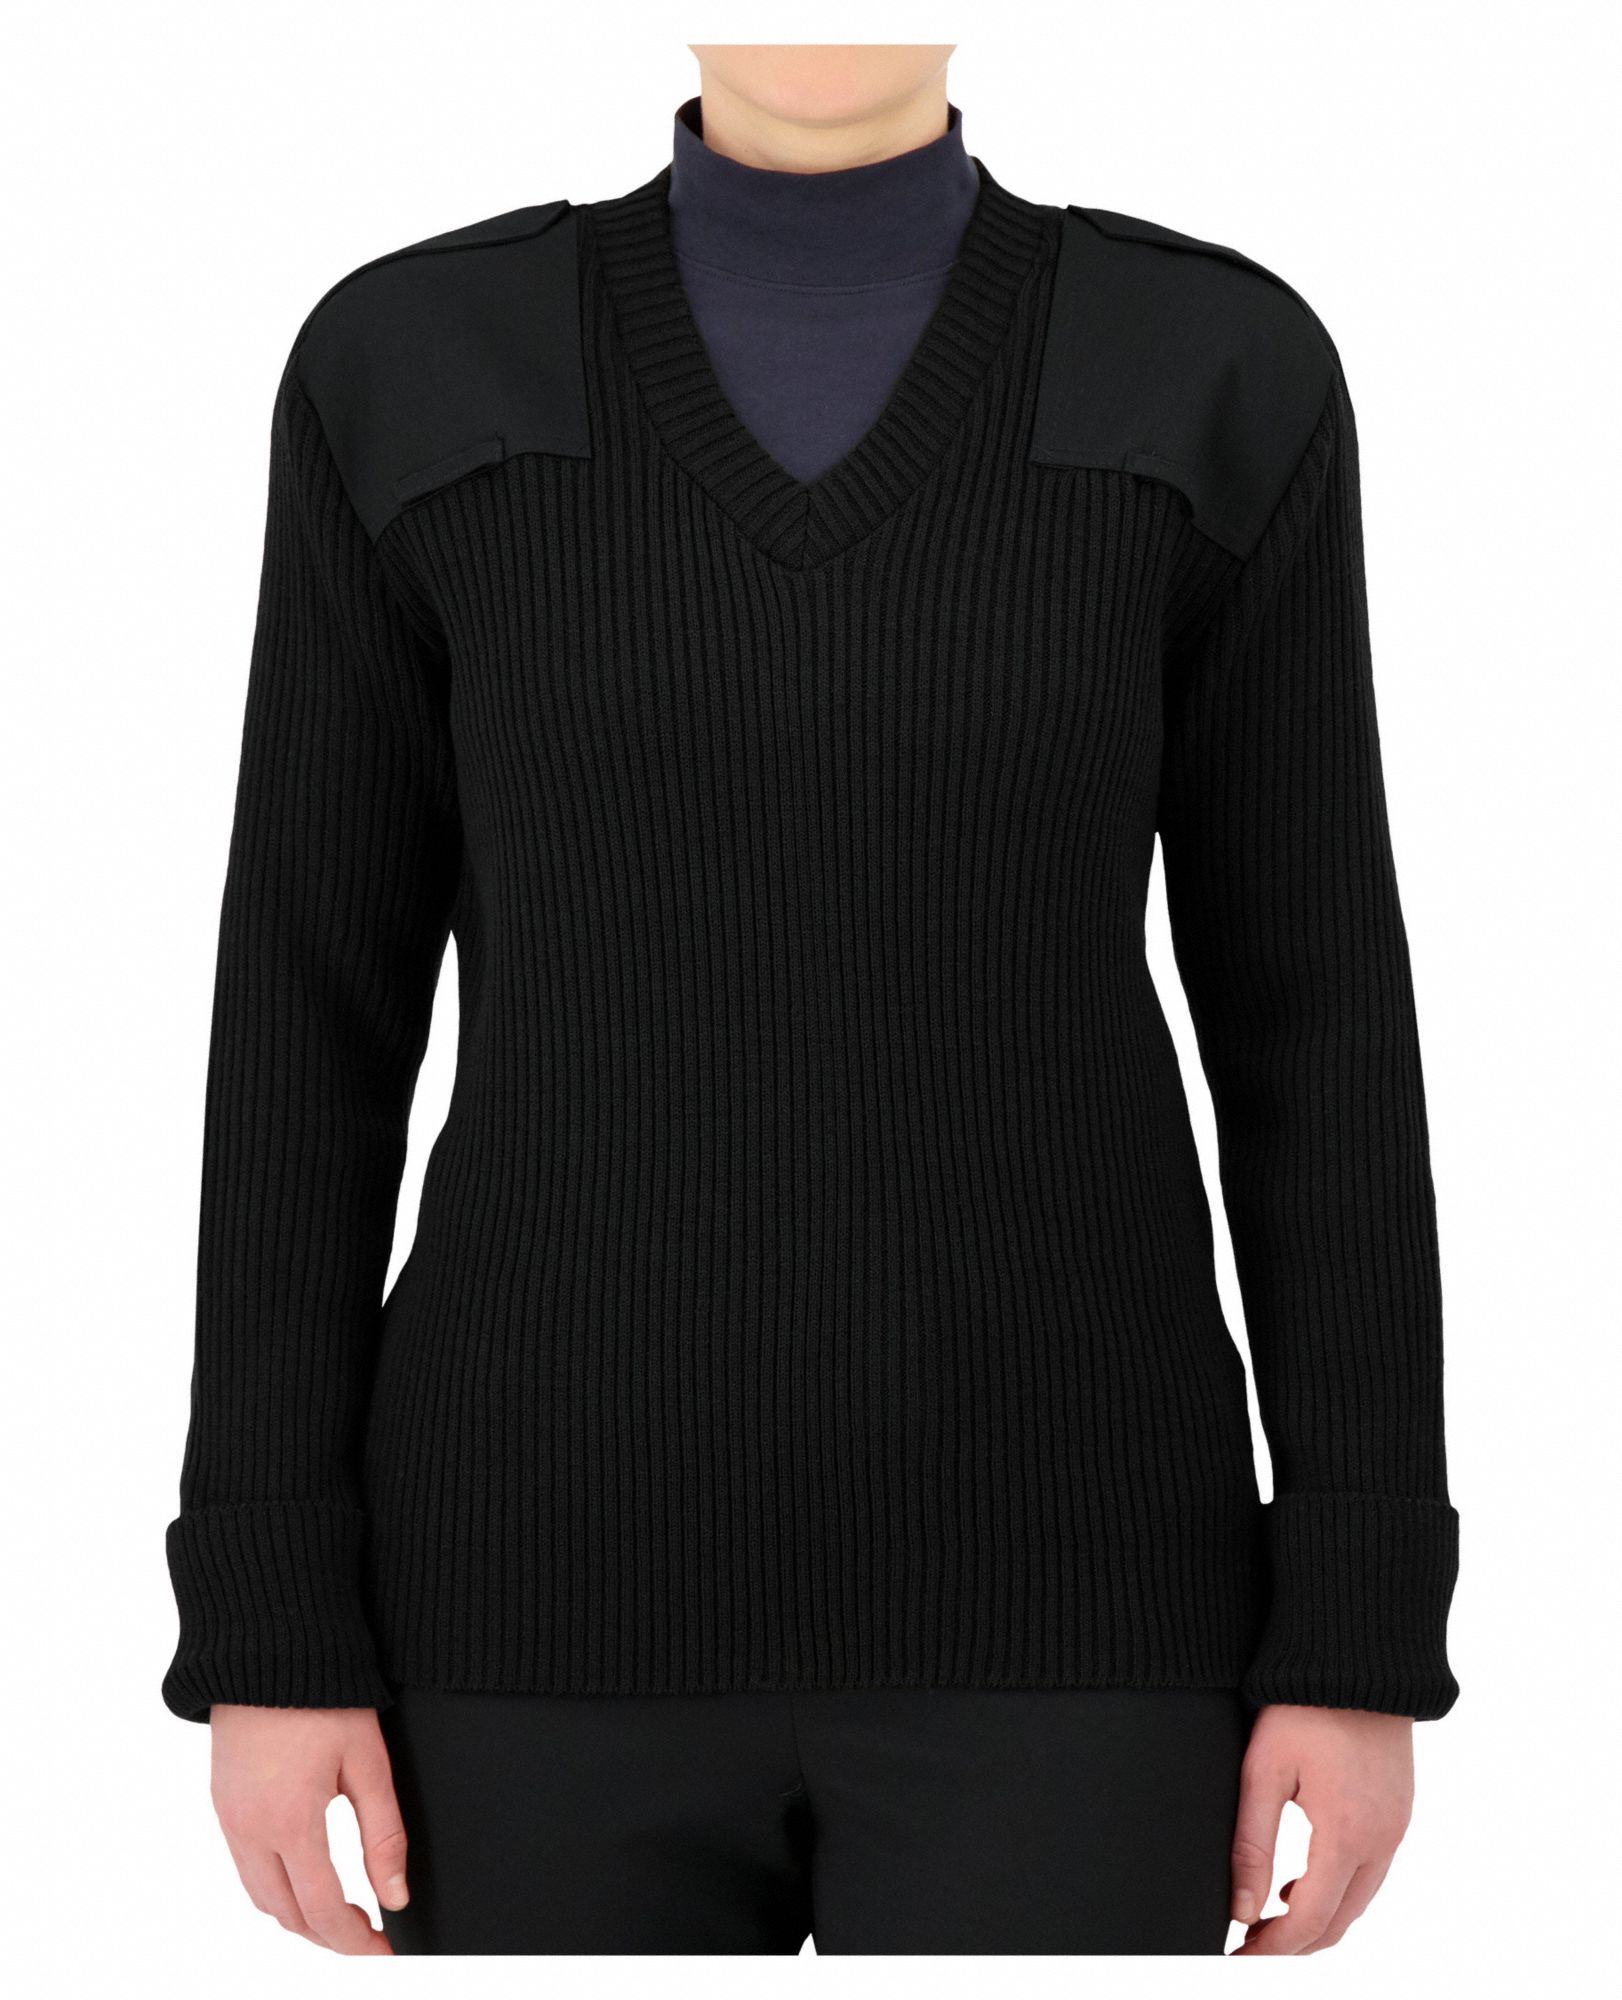 V-Neck Military Sweater: XS, 38 in Fits Chest Size, Black, 100% Acrylic Material